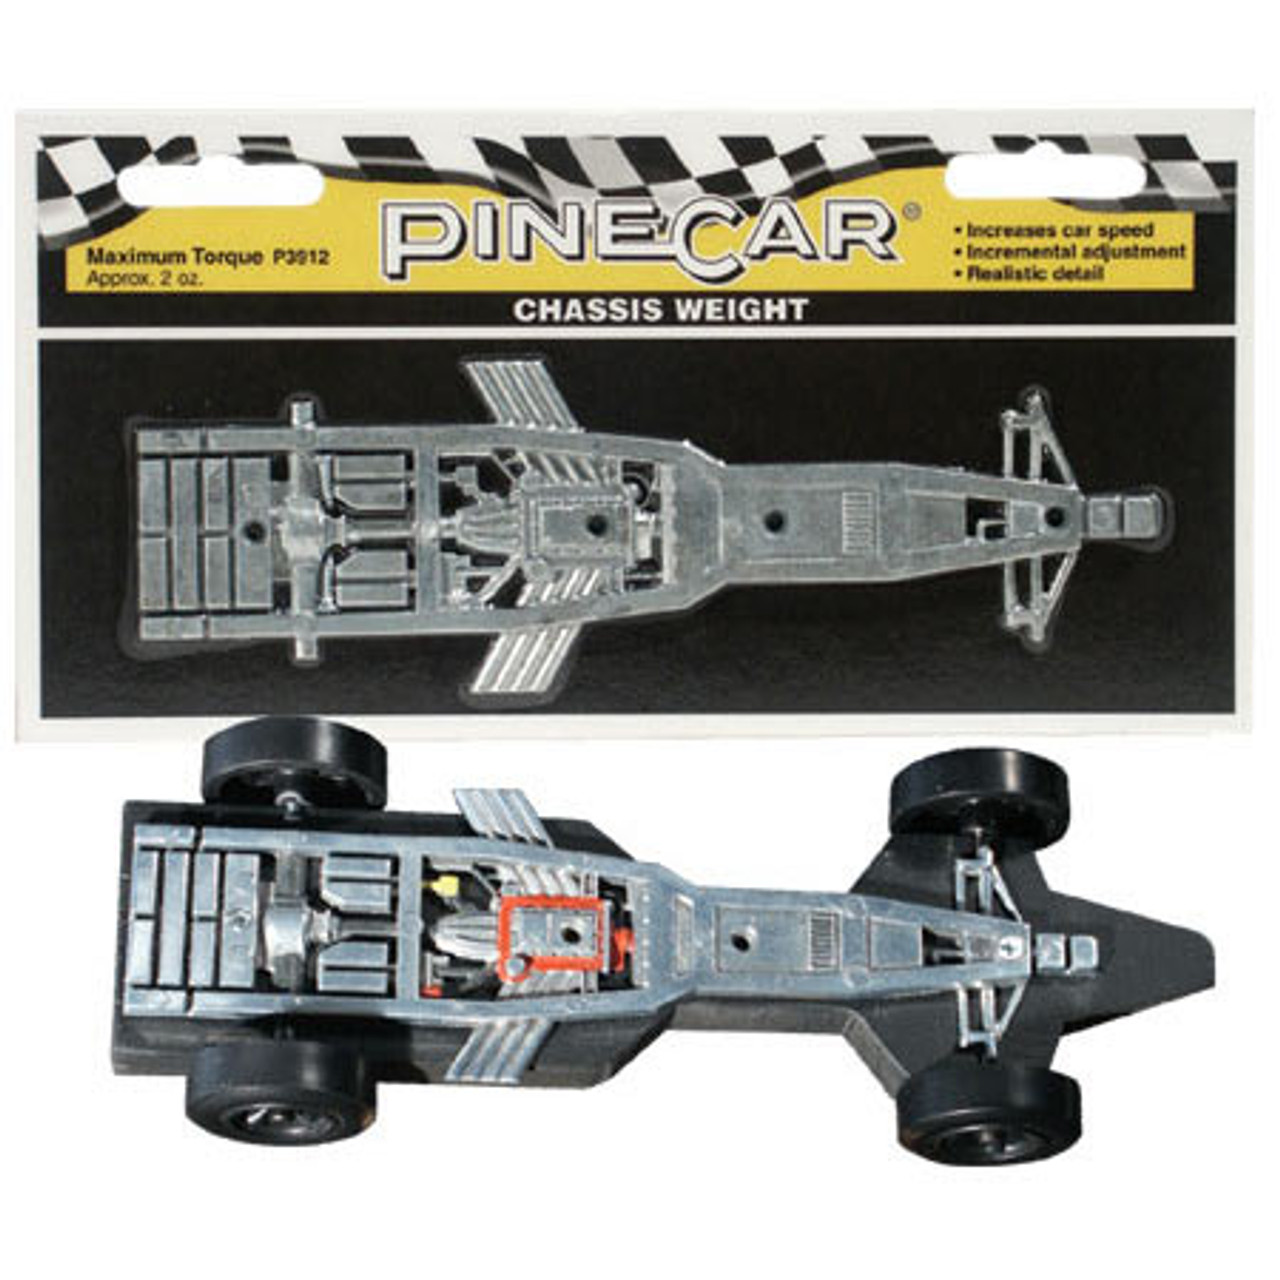 PINECAR PINEWOOD DERBY P353 BAR WEIGHTS 2 OZ NEW NIP - C&S Sports and Hobby